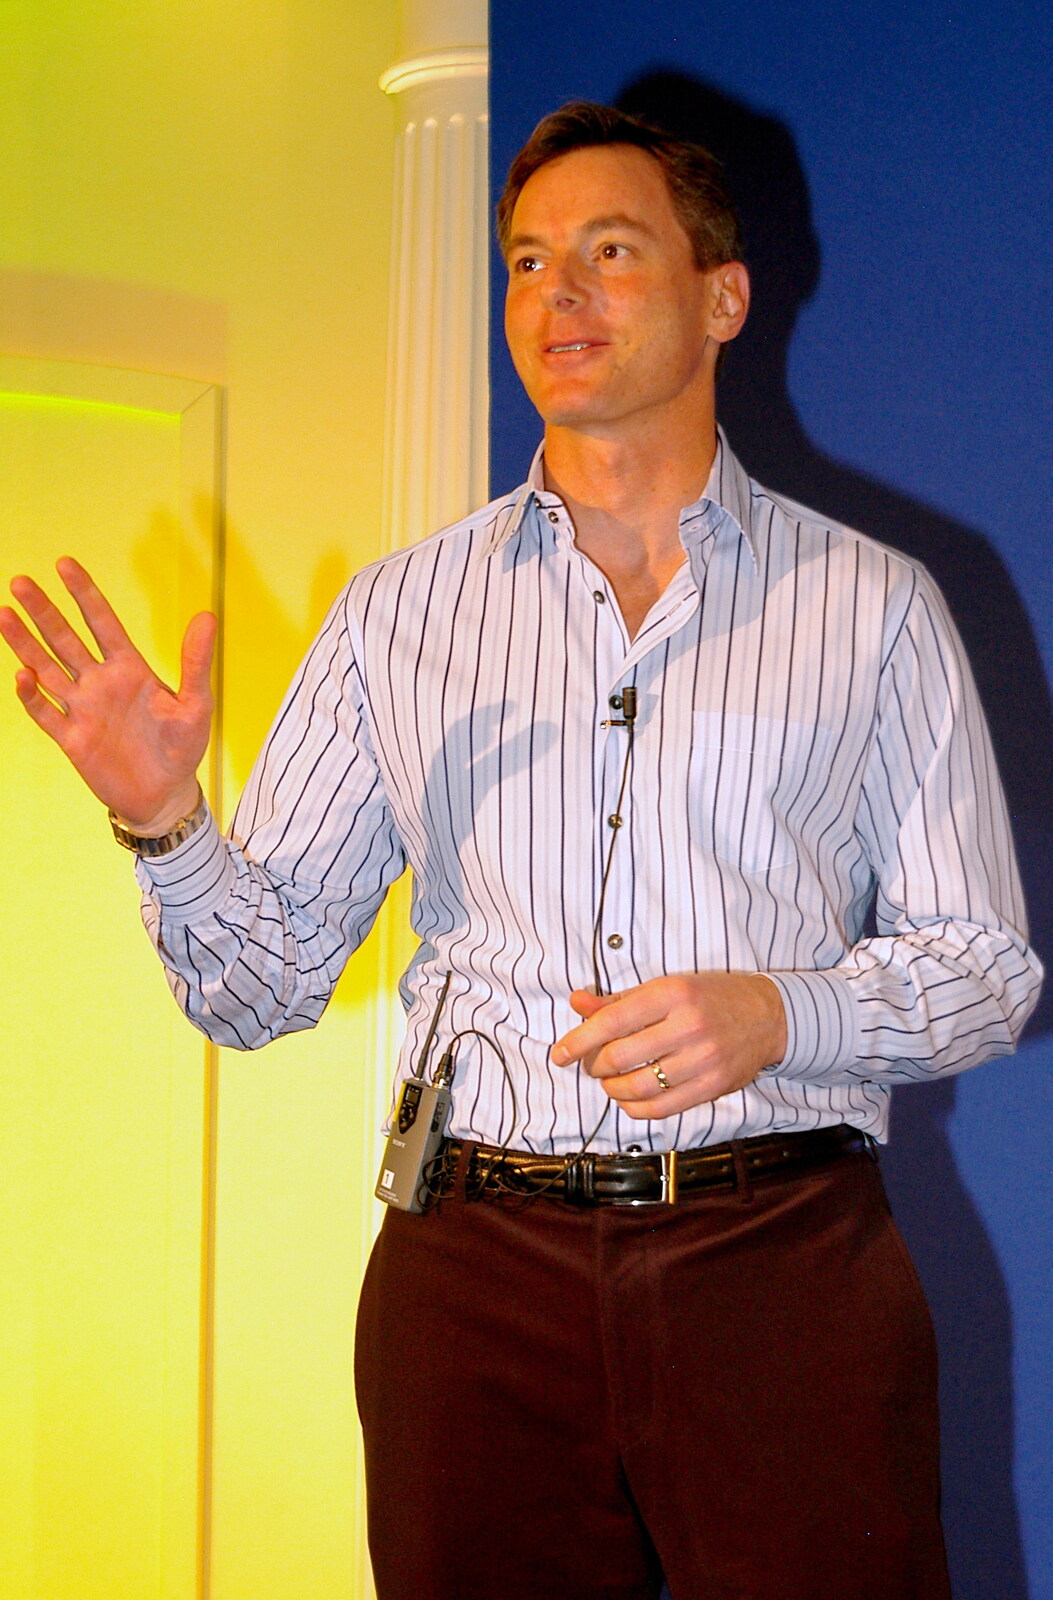 New CEO, Dr. Paul Jacobs from Qualcomm Europe All-Hands at the Berkeley Hotel, London - 9th November 2005